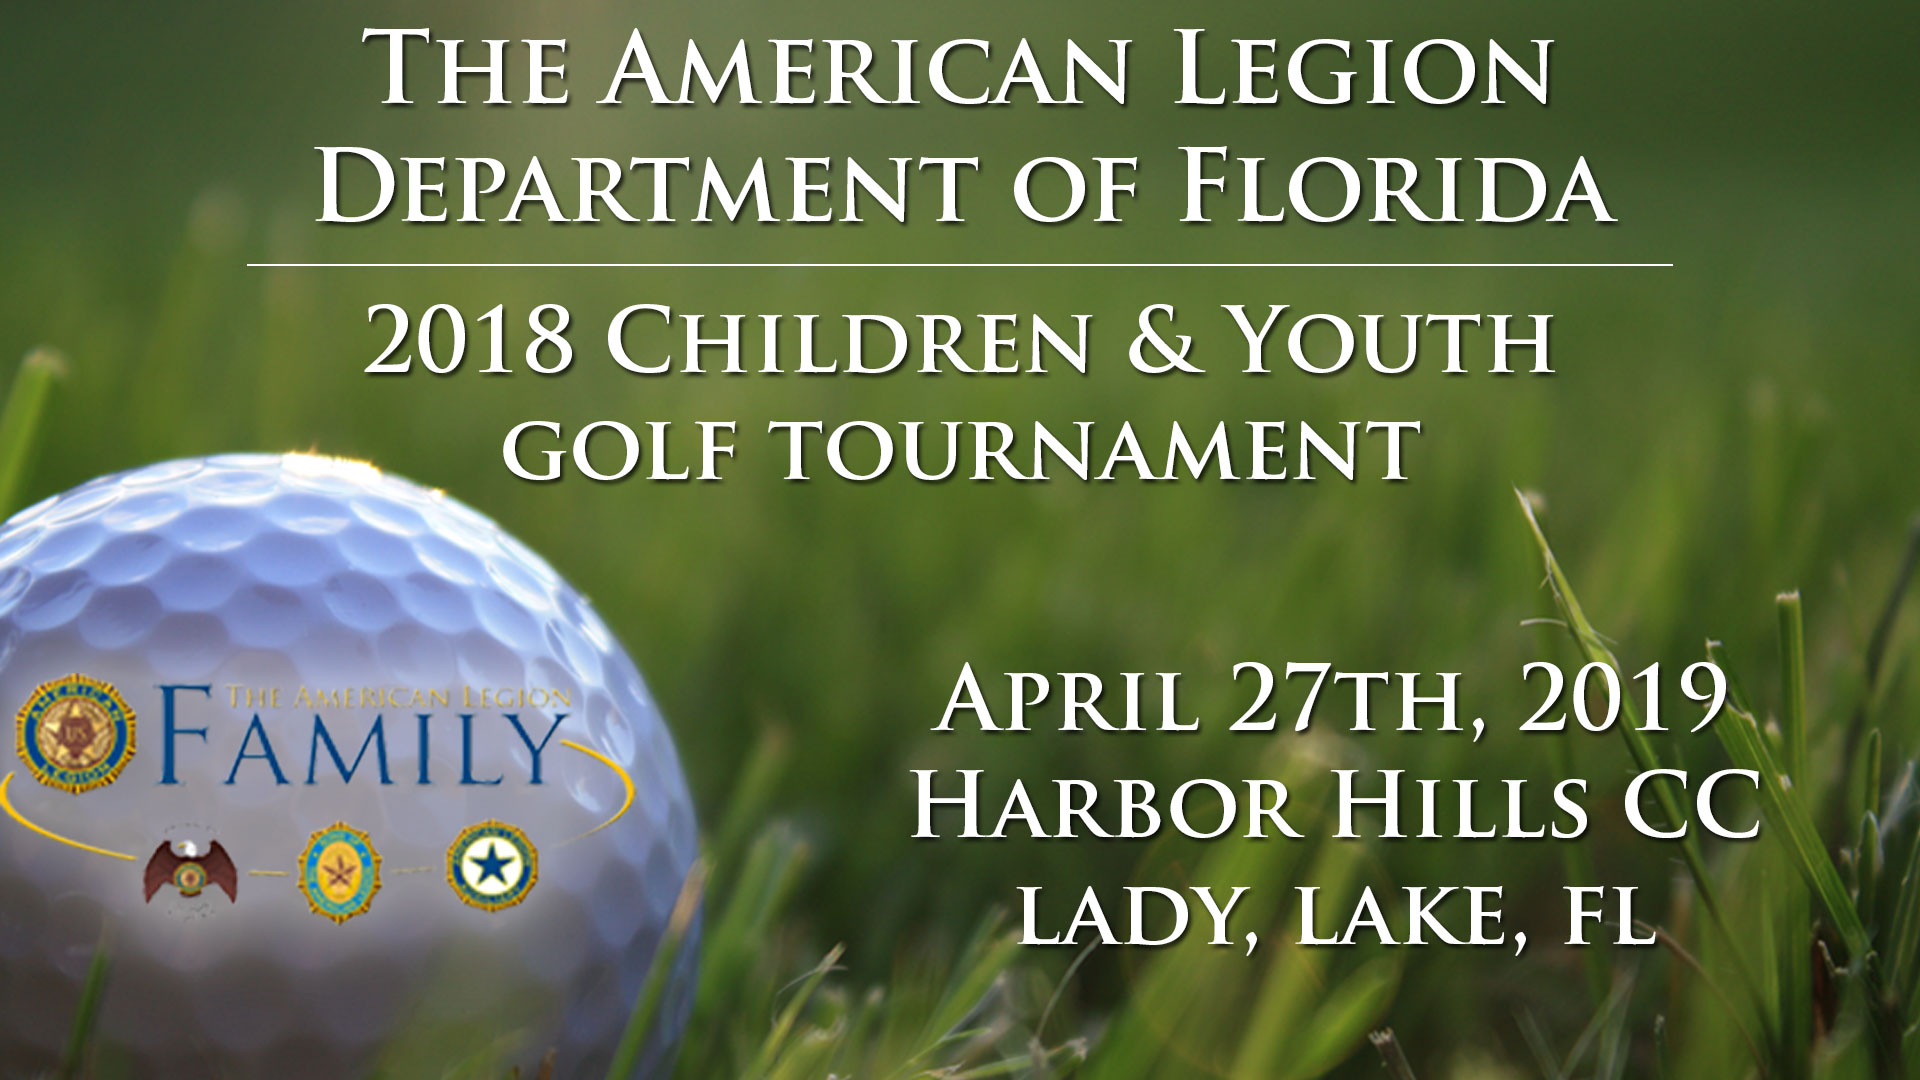 Annual Children & Youth Golf Tournament Sons of The American Legion